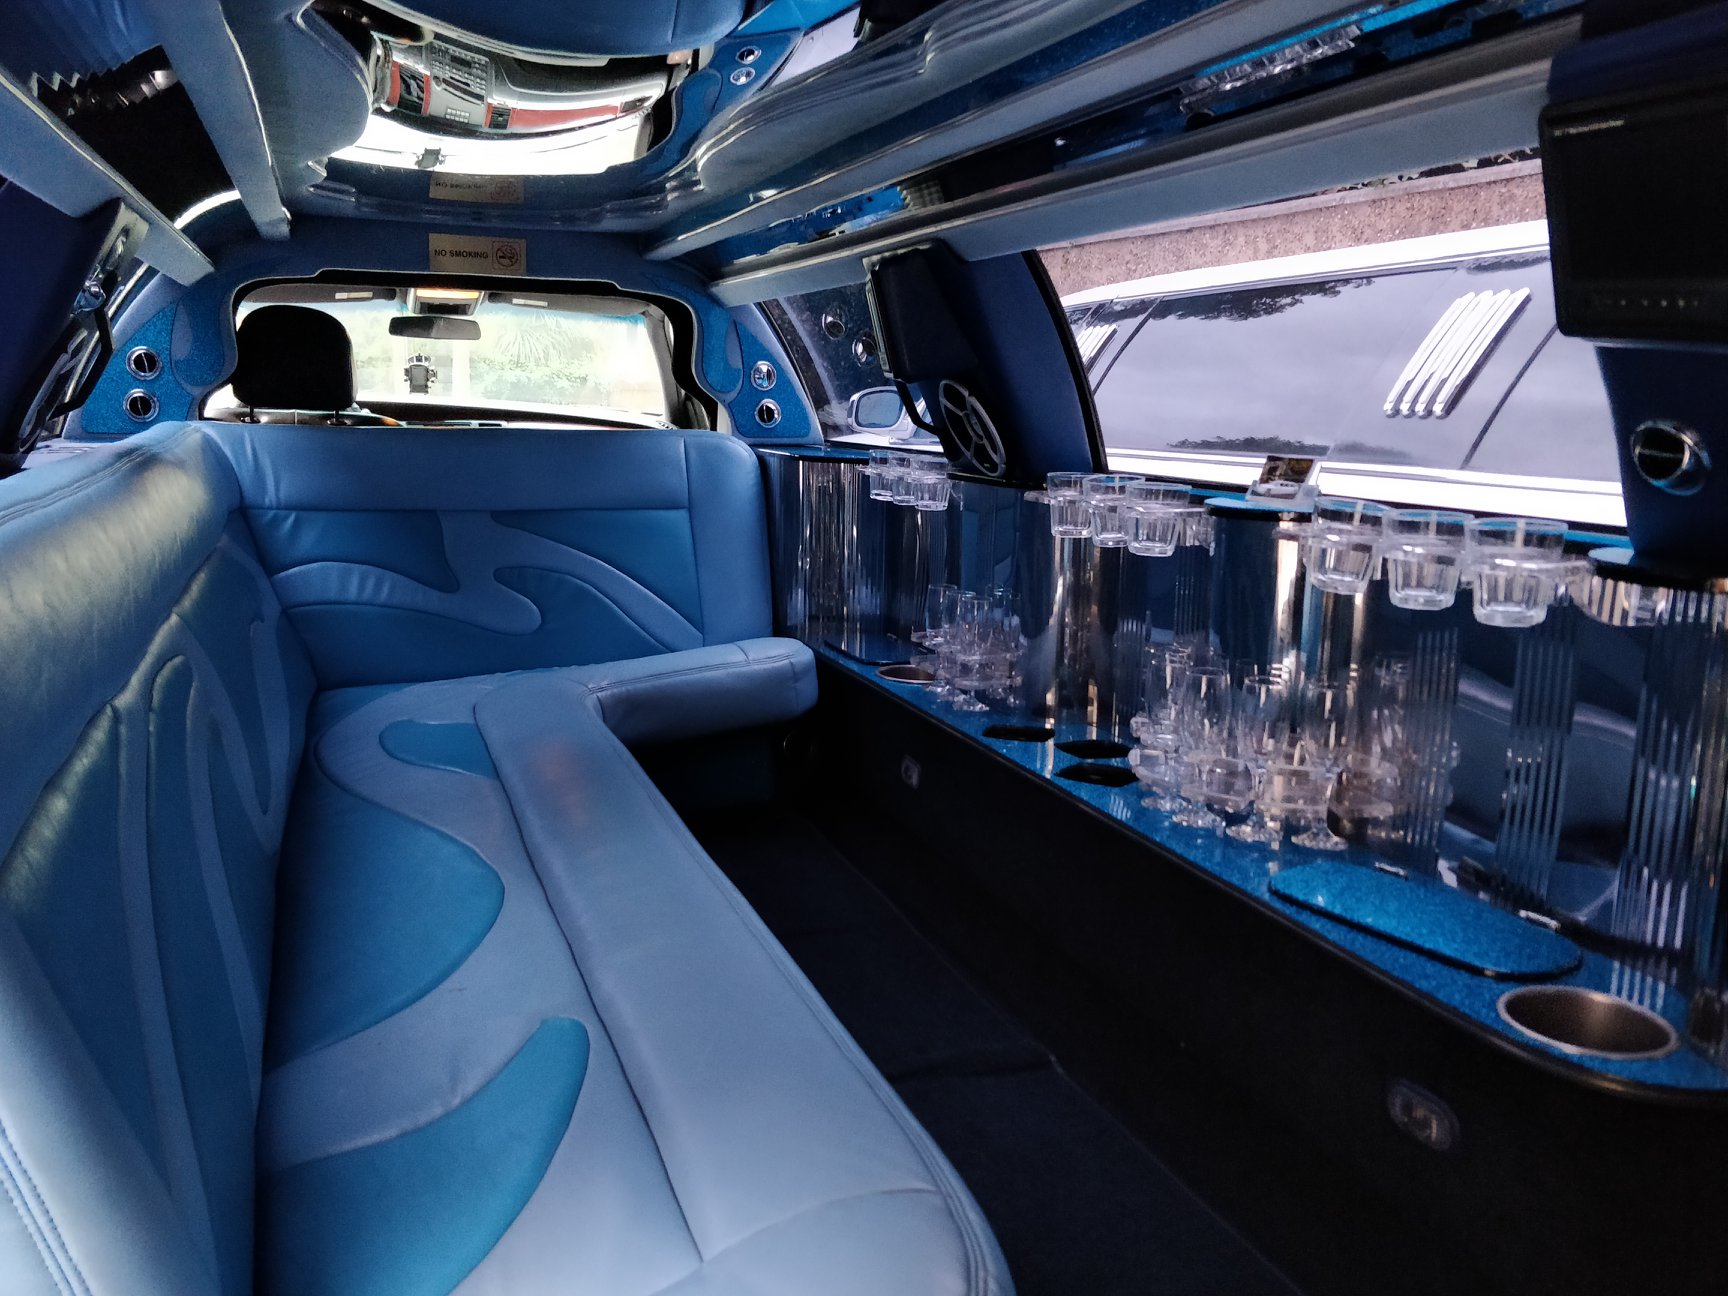 Interior of a stretched, luxury limousine